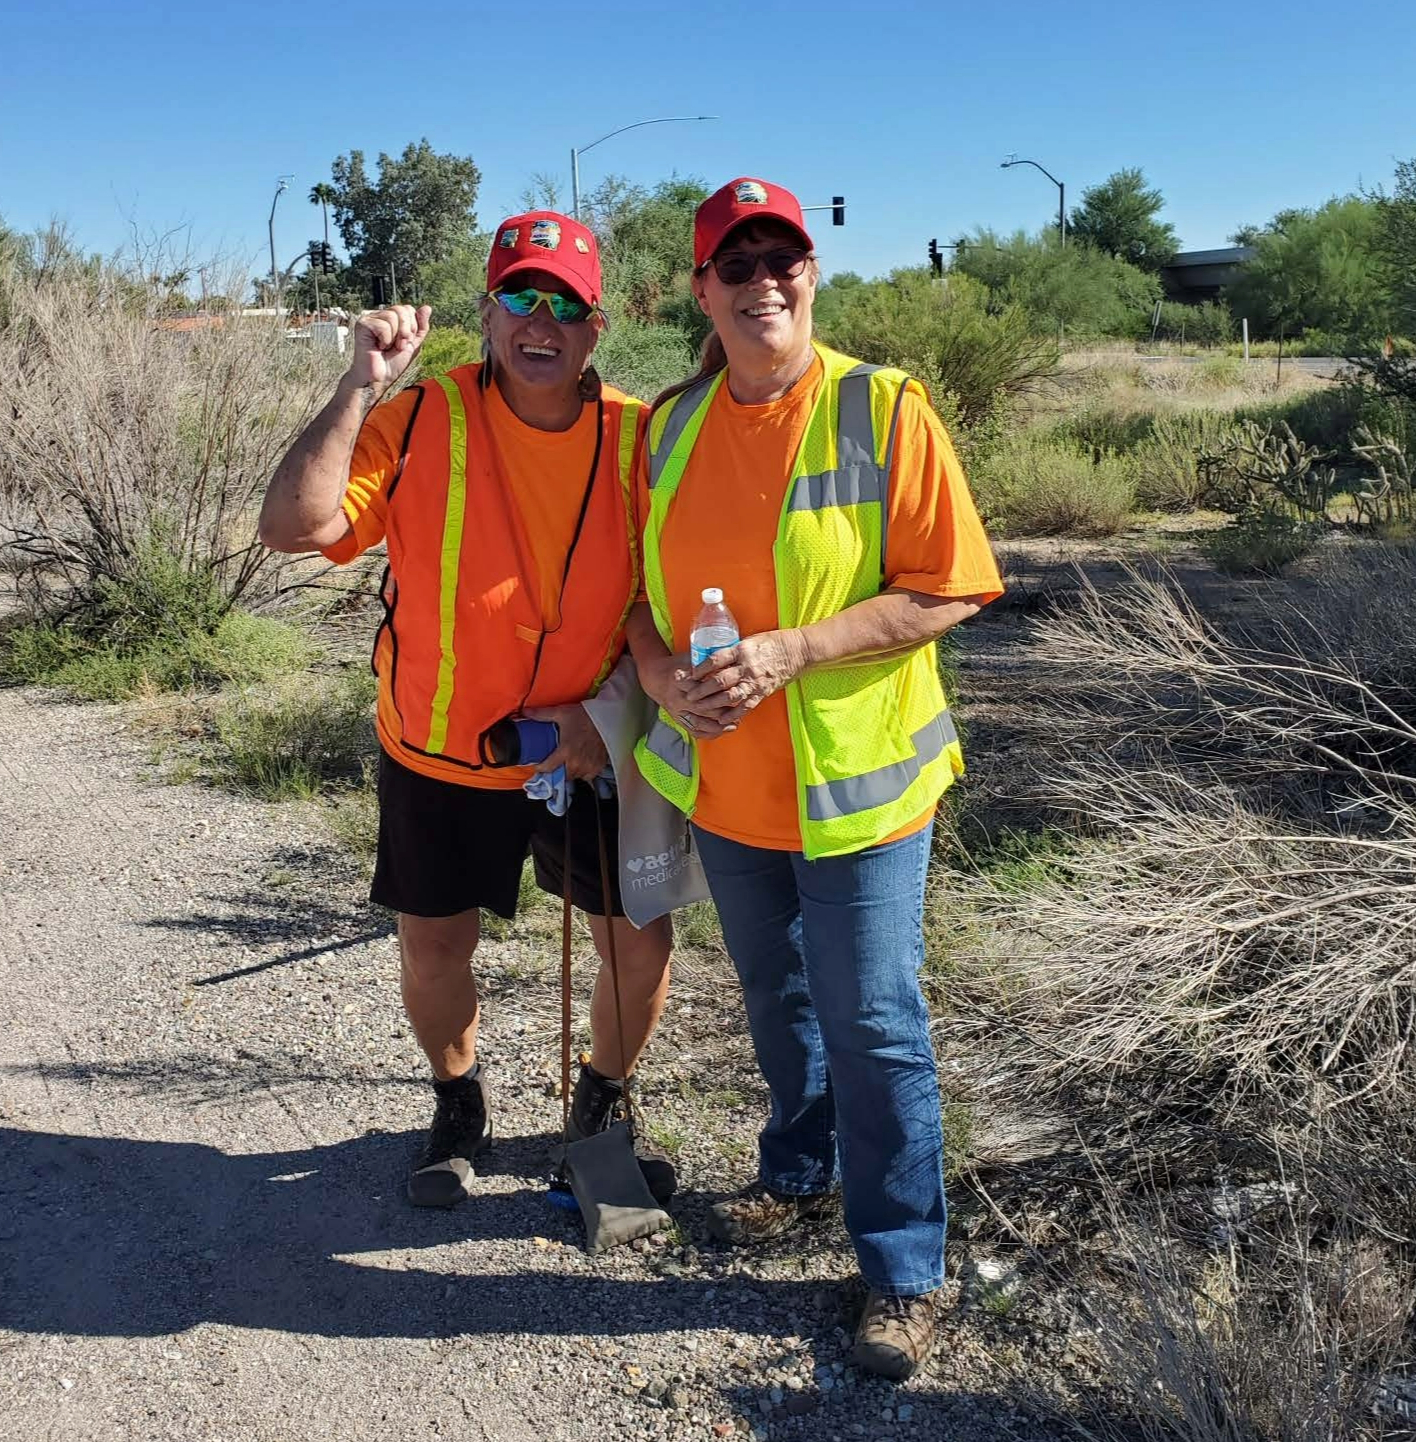 Two people pose for a photo during a litter clean-up event near a road.